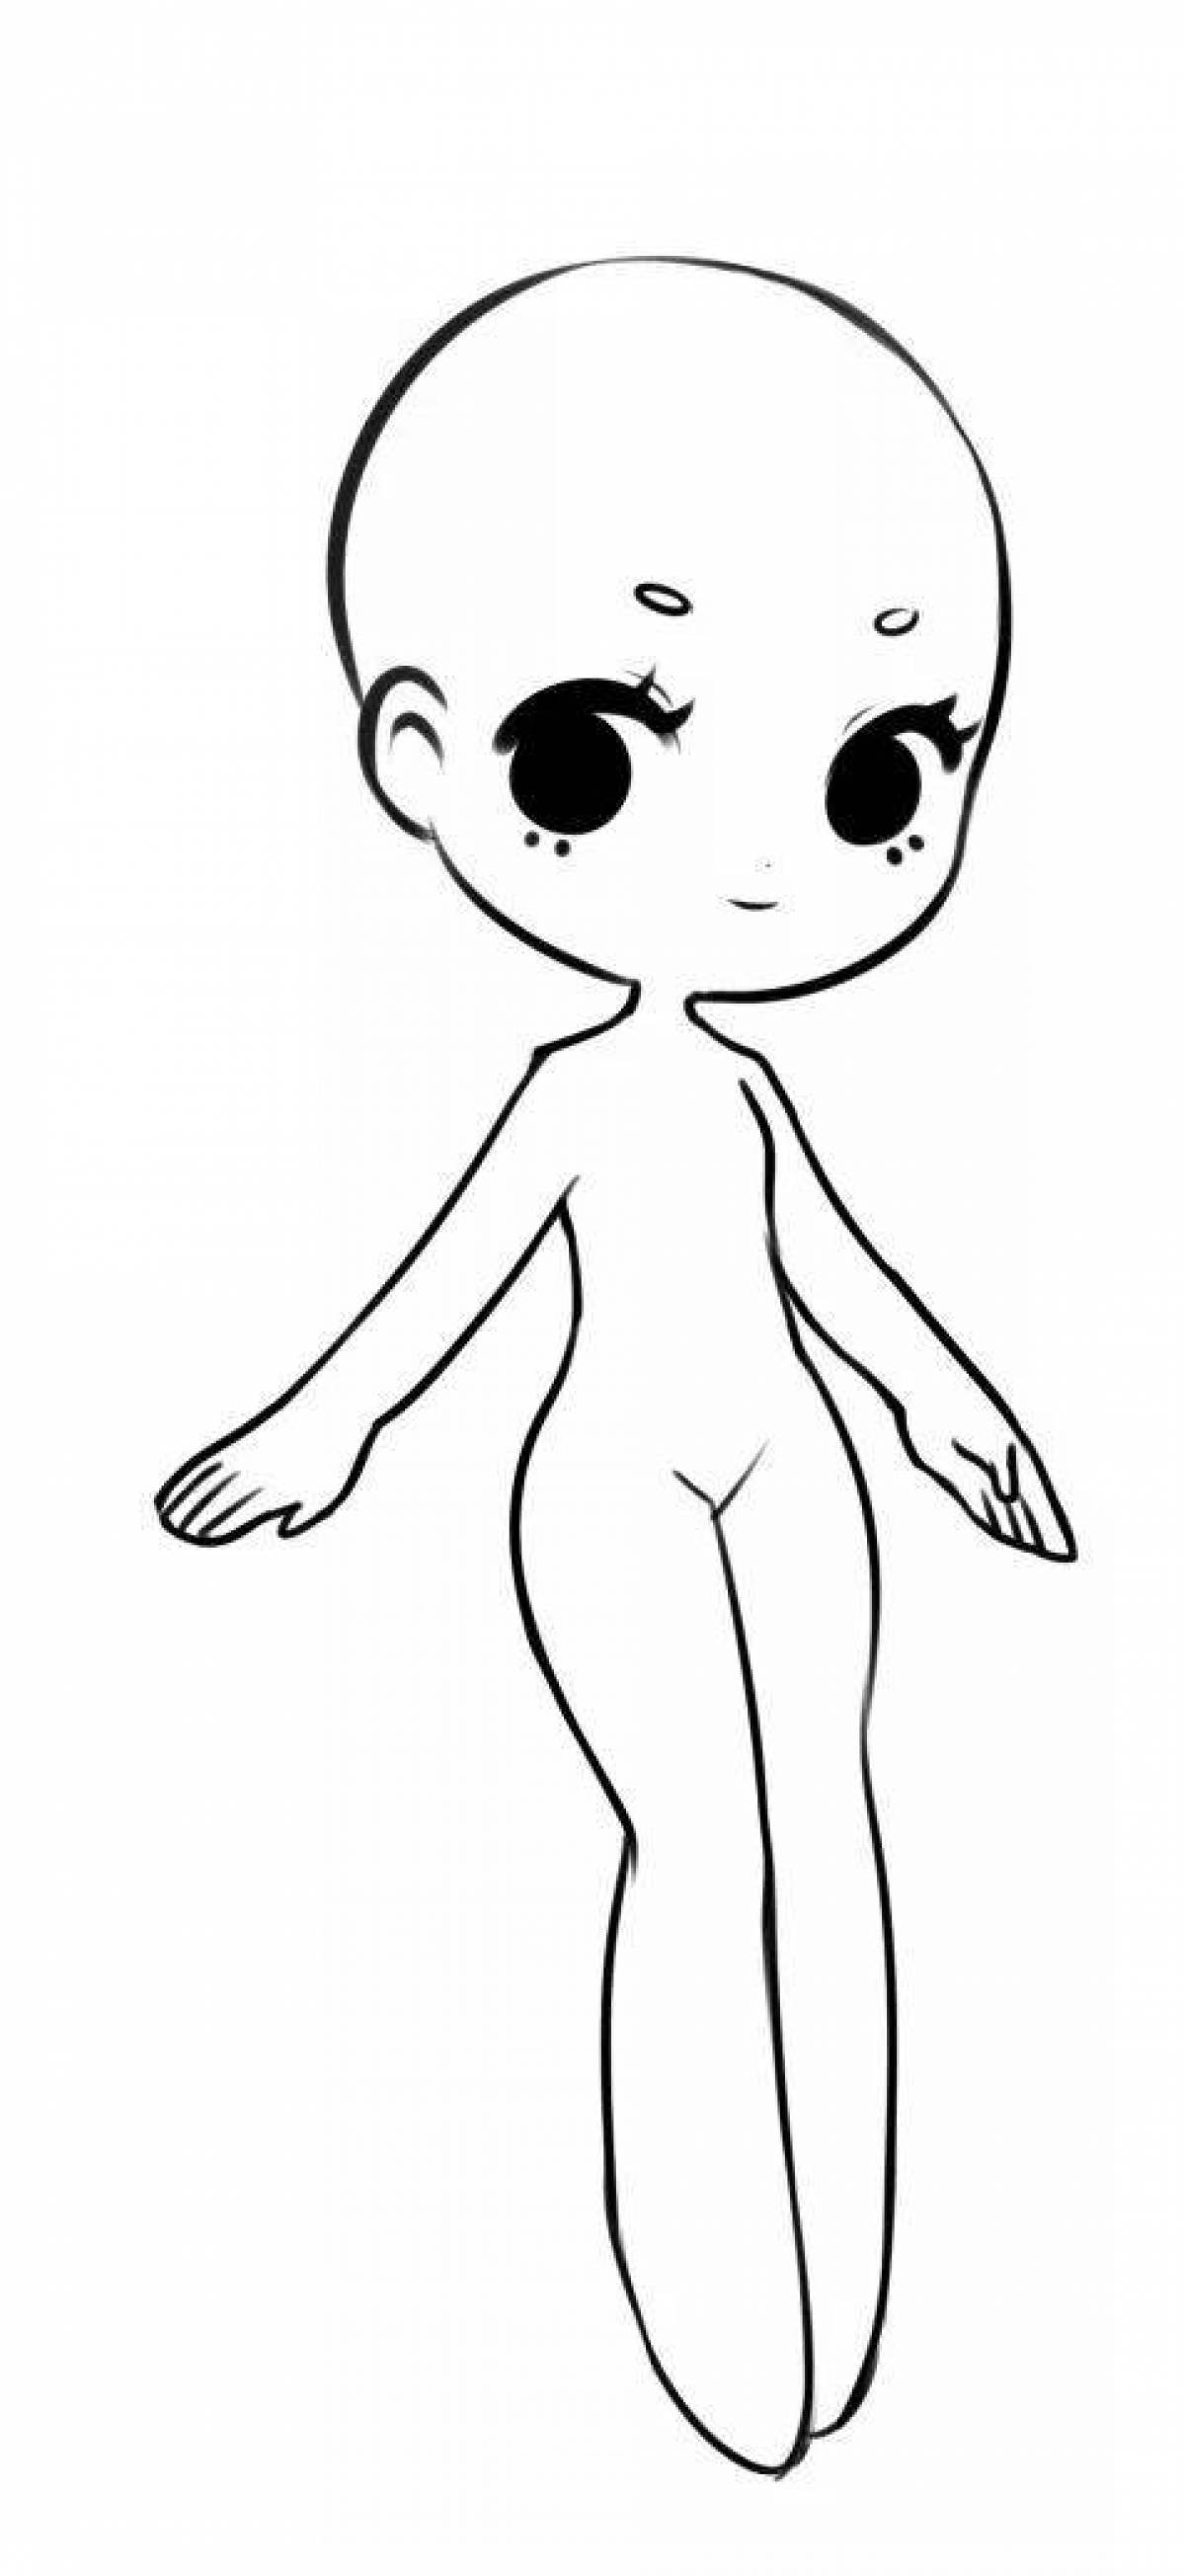 Adorable anime body coloring page